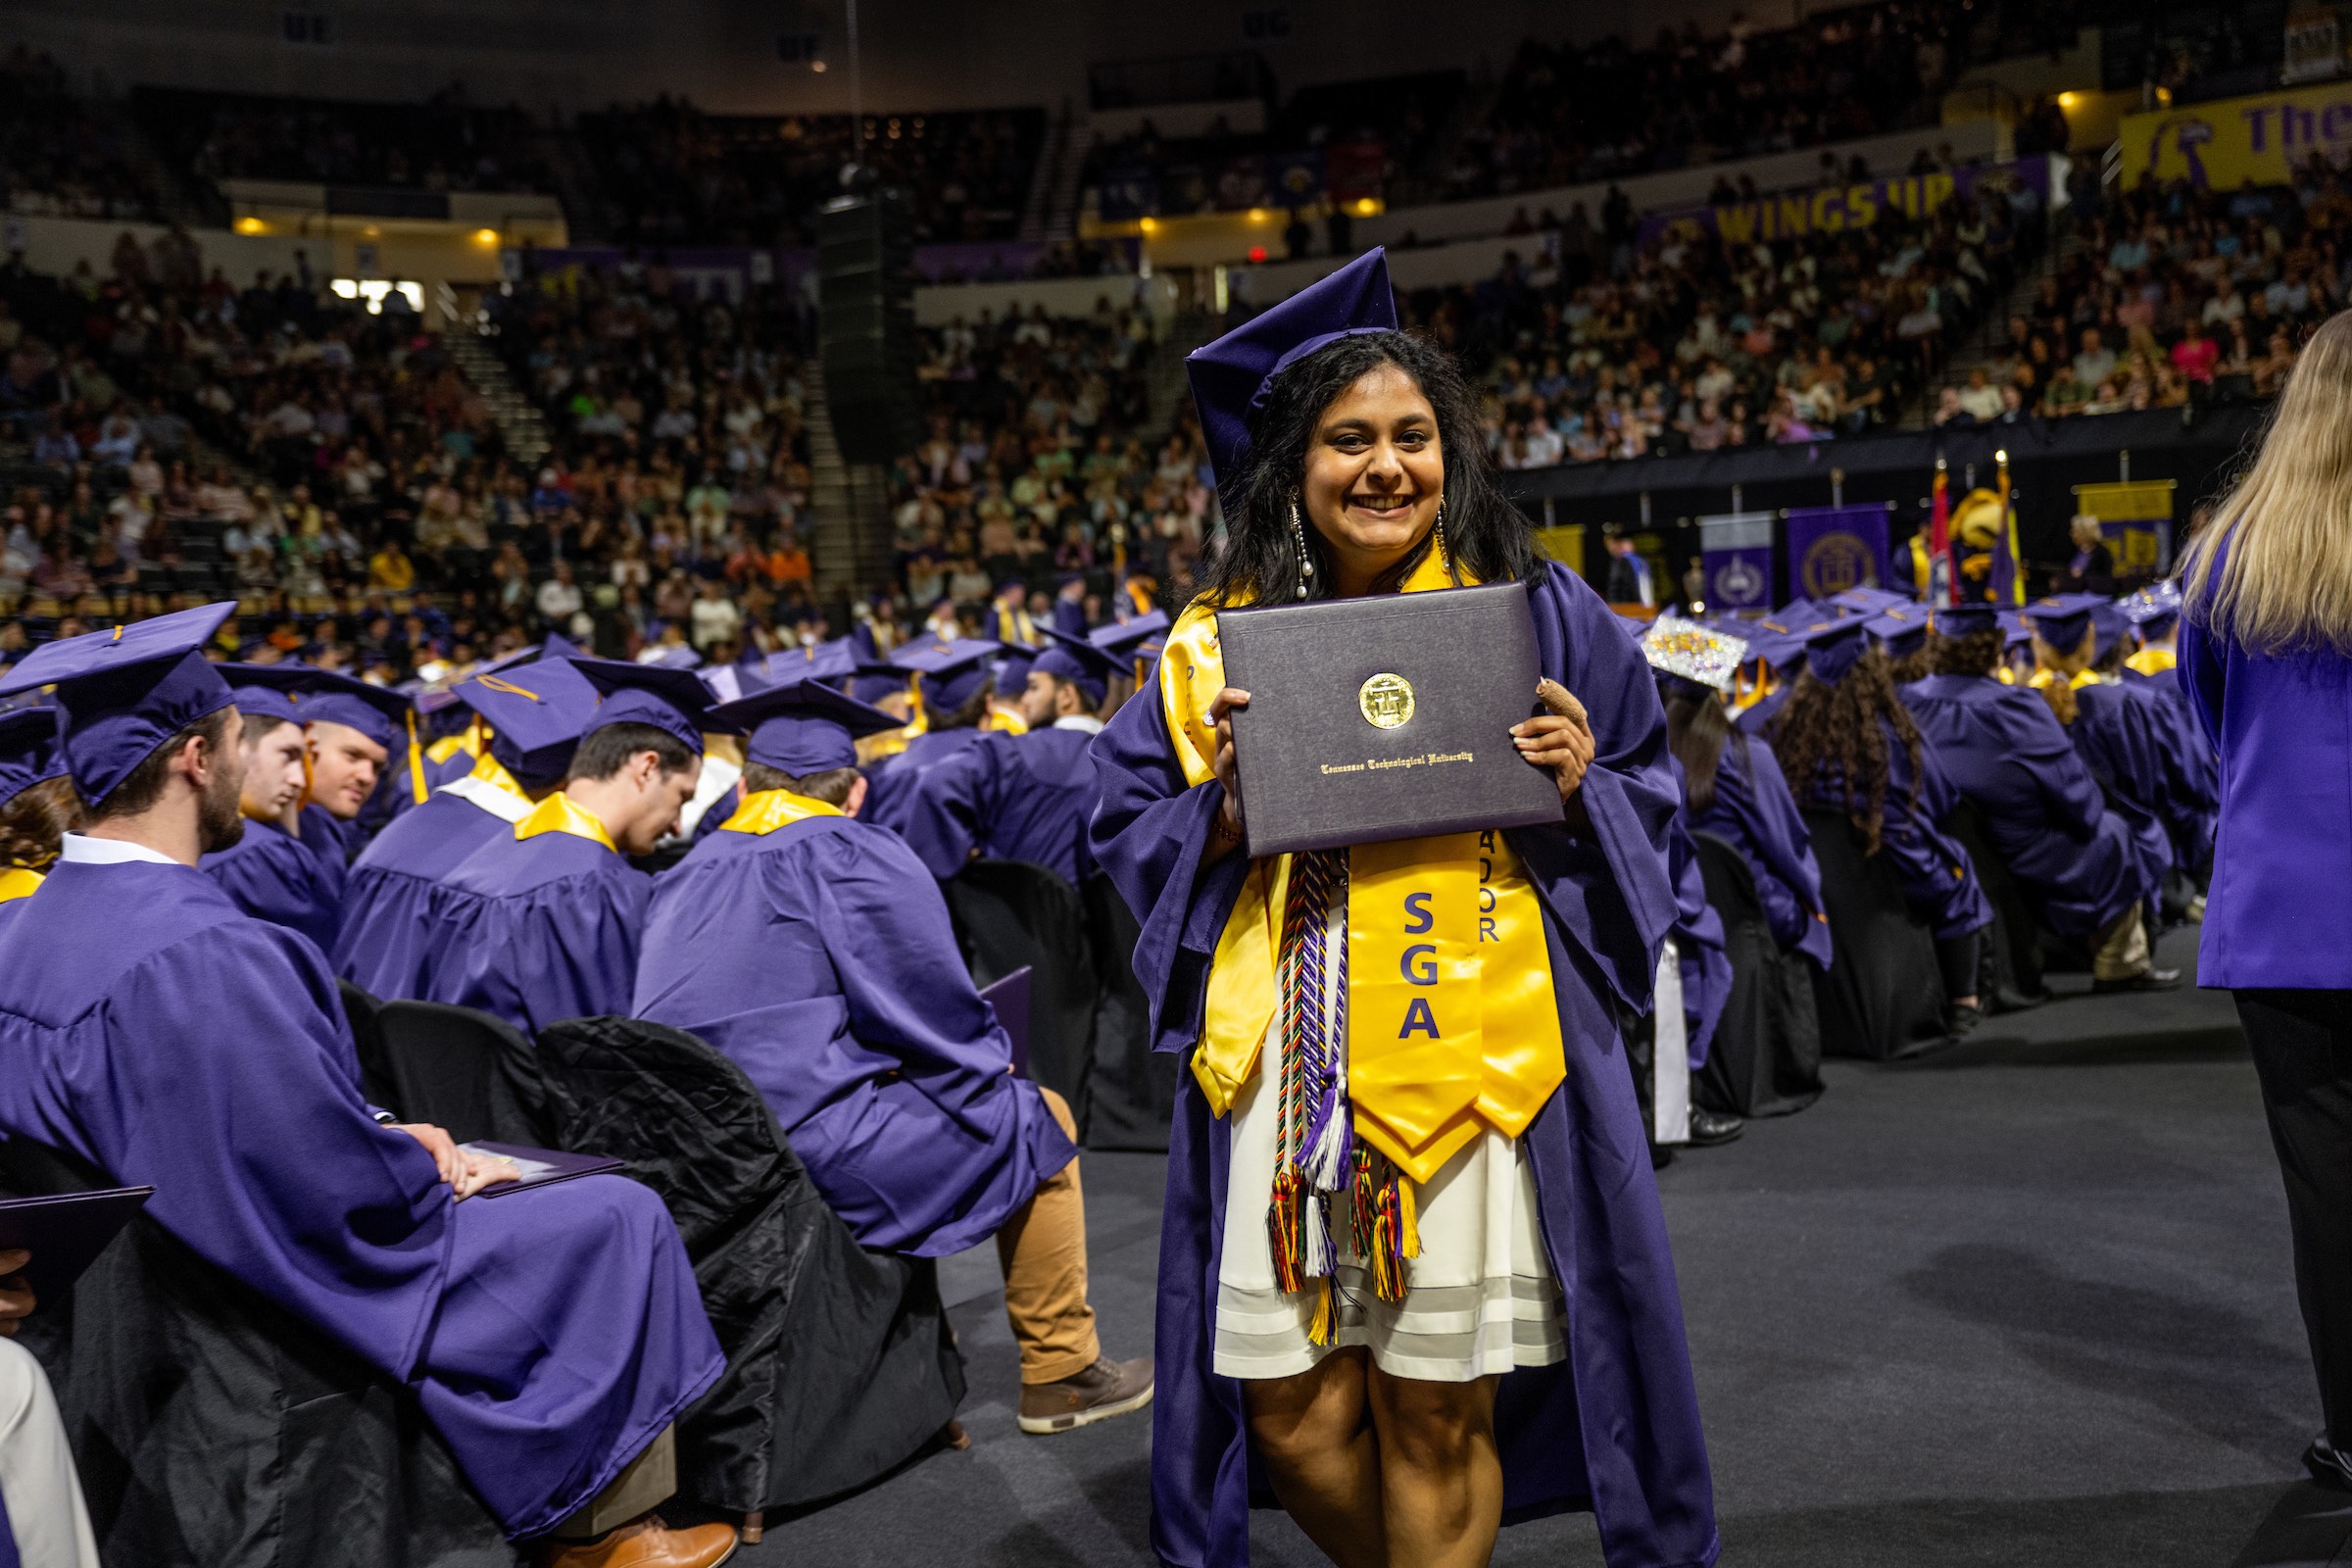 Tech College of Engineering graduate Pooja Patel smiles with her degree in hand.